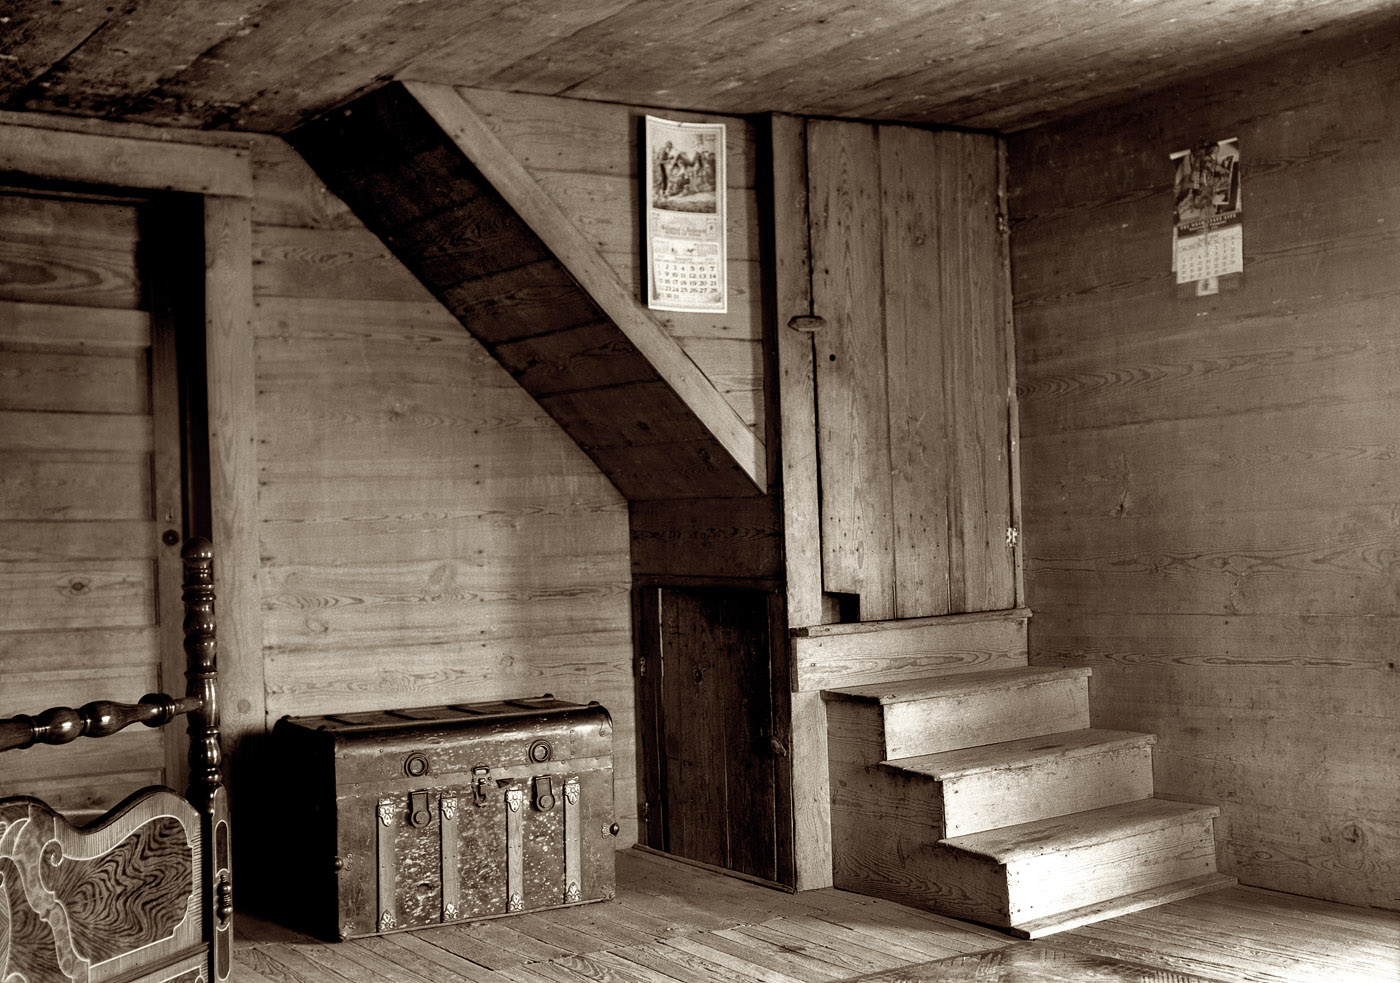 July 1939. "Corner of tobacco farmer's front room. Shows enclosed stairway and corner of the new fancy bed. Person County, North Carolina." (Whitfield home.) Medium-format nitrate negative by Dorothea Lange. View full size.